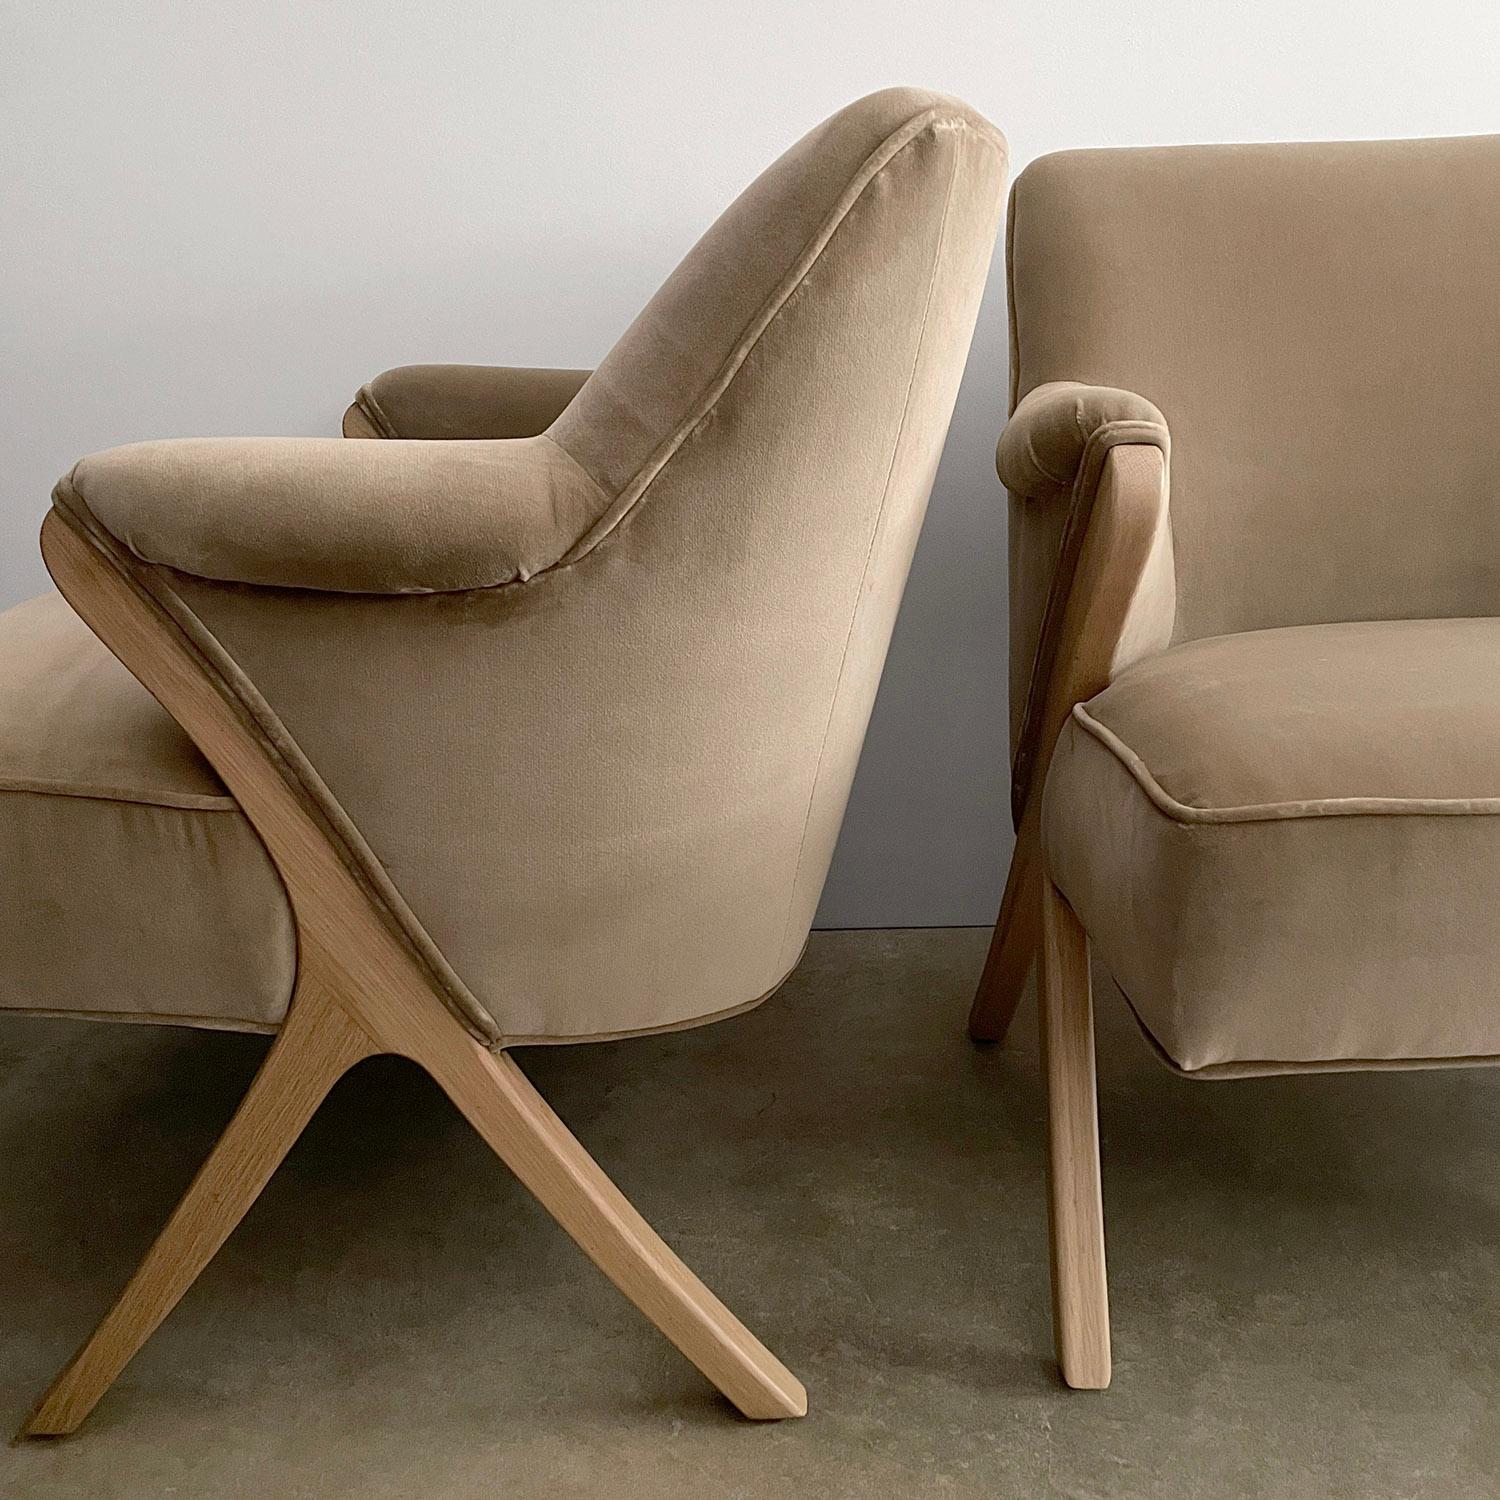 Pair of 1940s French lounge chairs
This chair is beautiful from all angles
Newly upholstered in a textured Italian velvet fabric
Beautifully sculpted splayed wishbone legs are constructed of solid white oak 
Newly refinished 
Please note - this is a